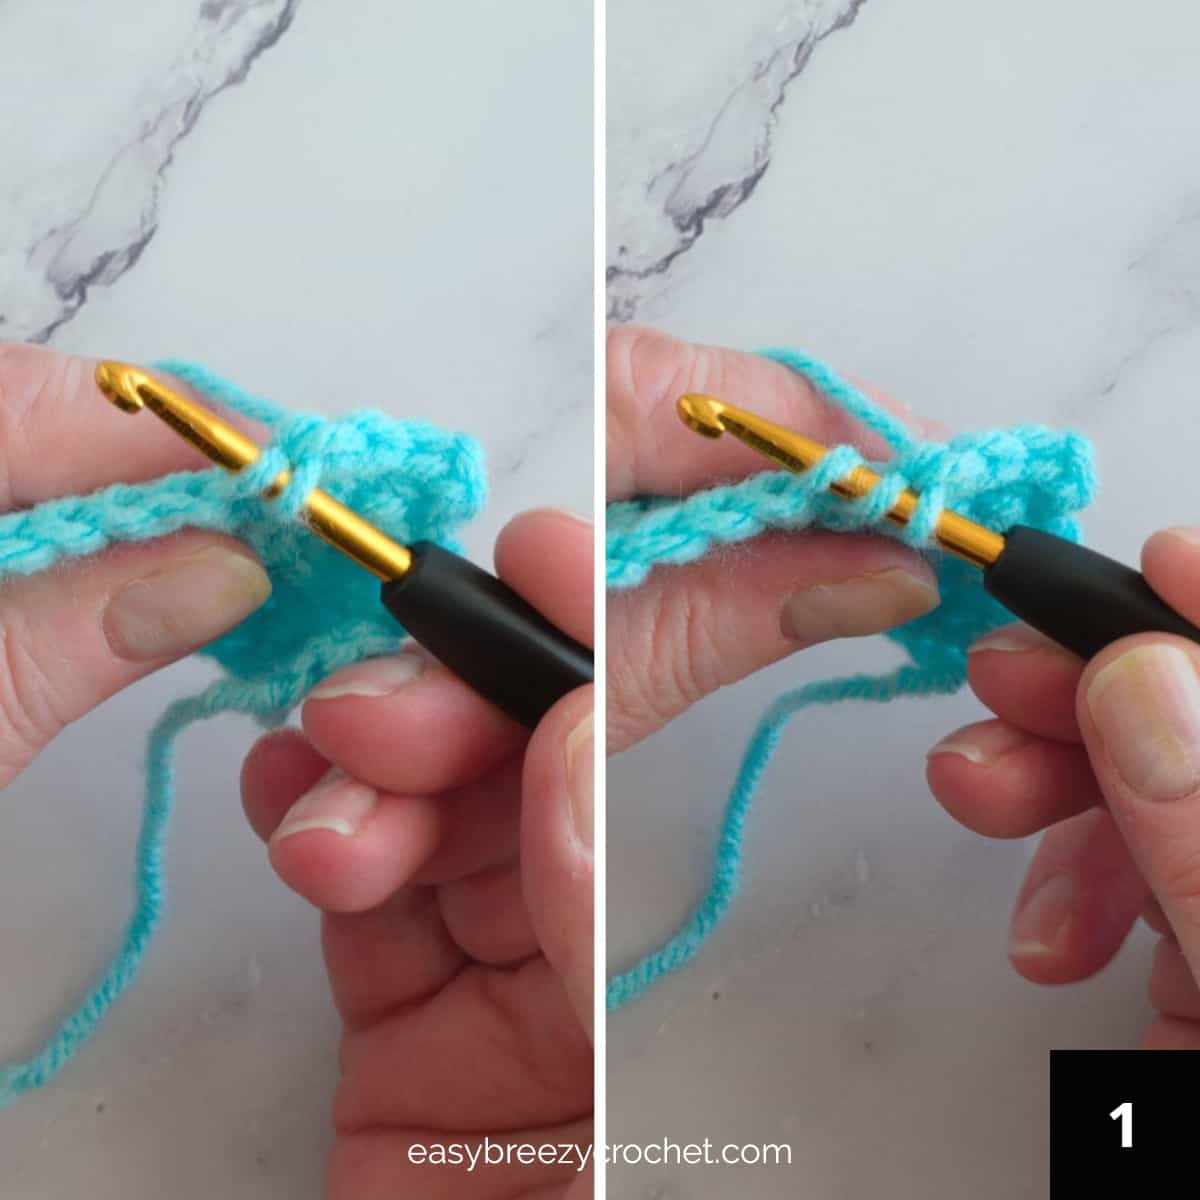 Image of step one of how to make a single crochet invisible decrease.